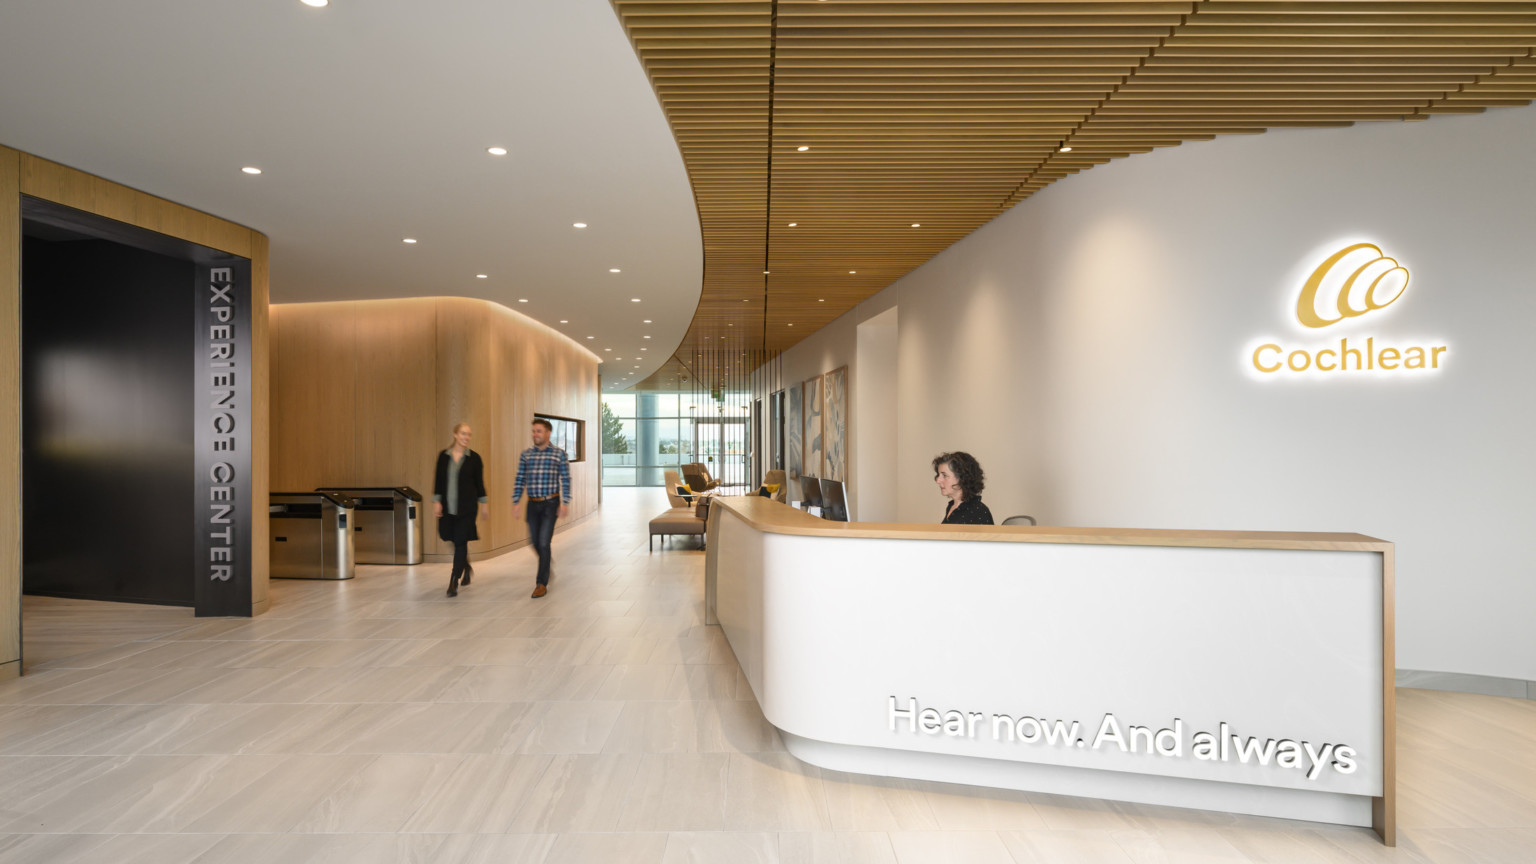 Cochlear North American Headquarters entrance with white reception desk in front of backlit logo with wood ceiling accents